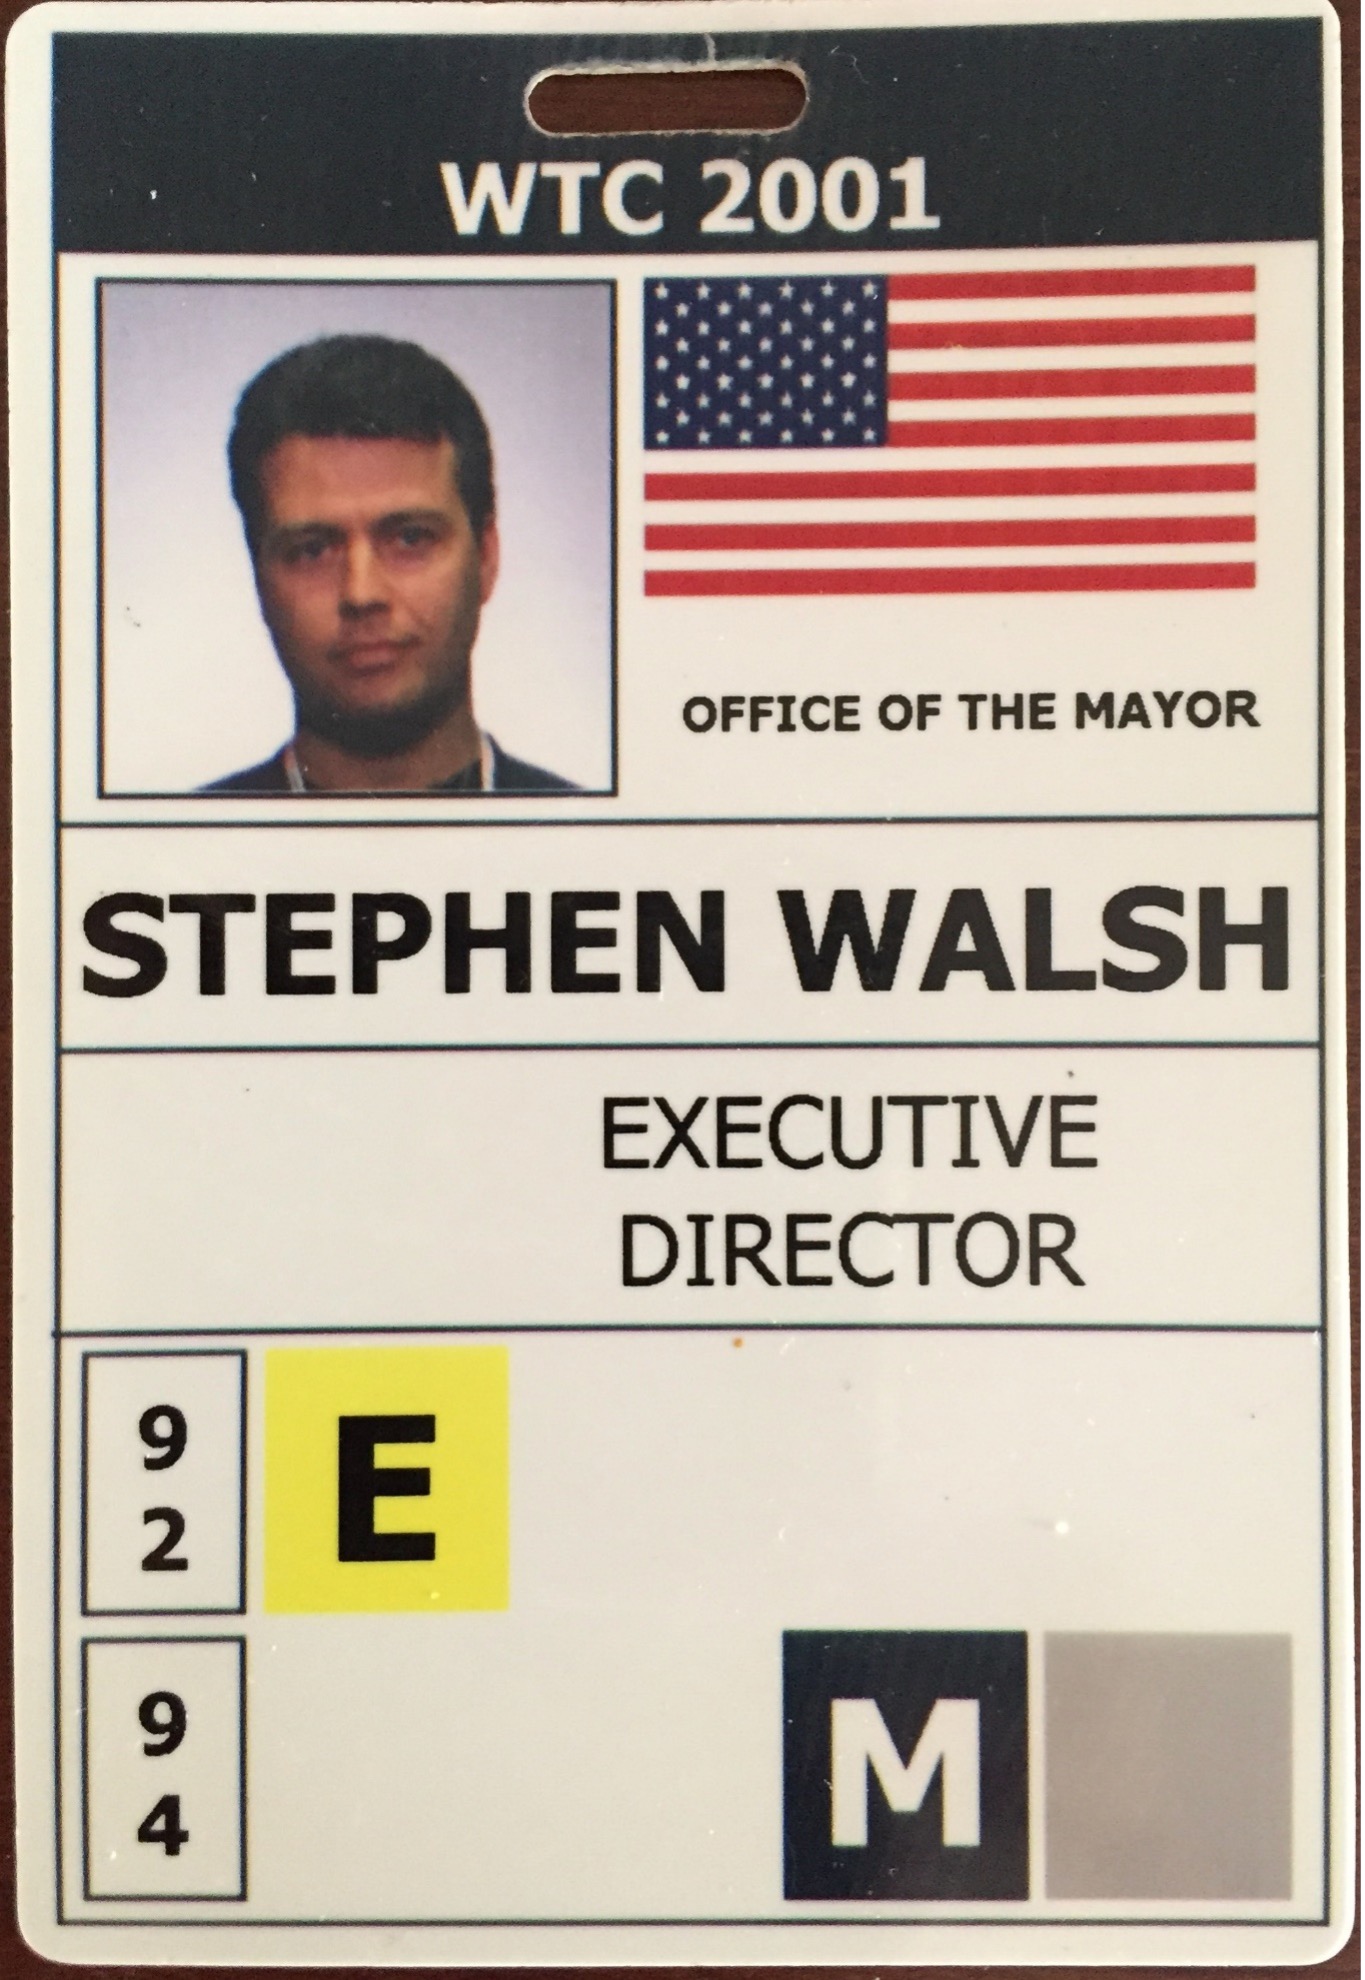 A World Trade Center ID card labeled "Mayor's Office," with the American flag and a photo of Stephen Walsh at the top